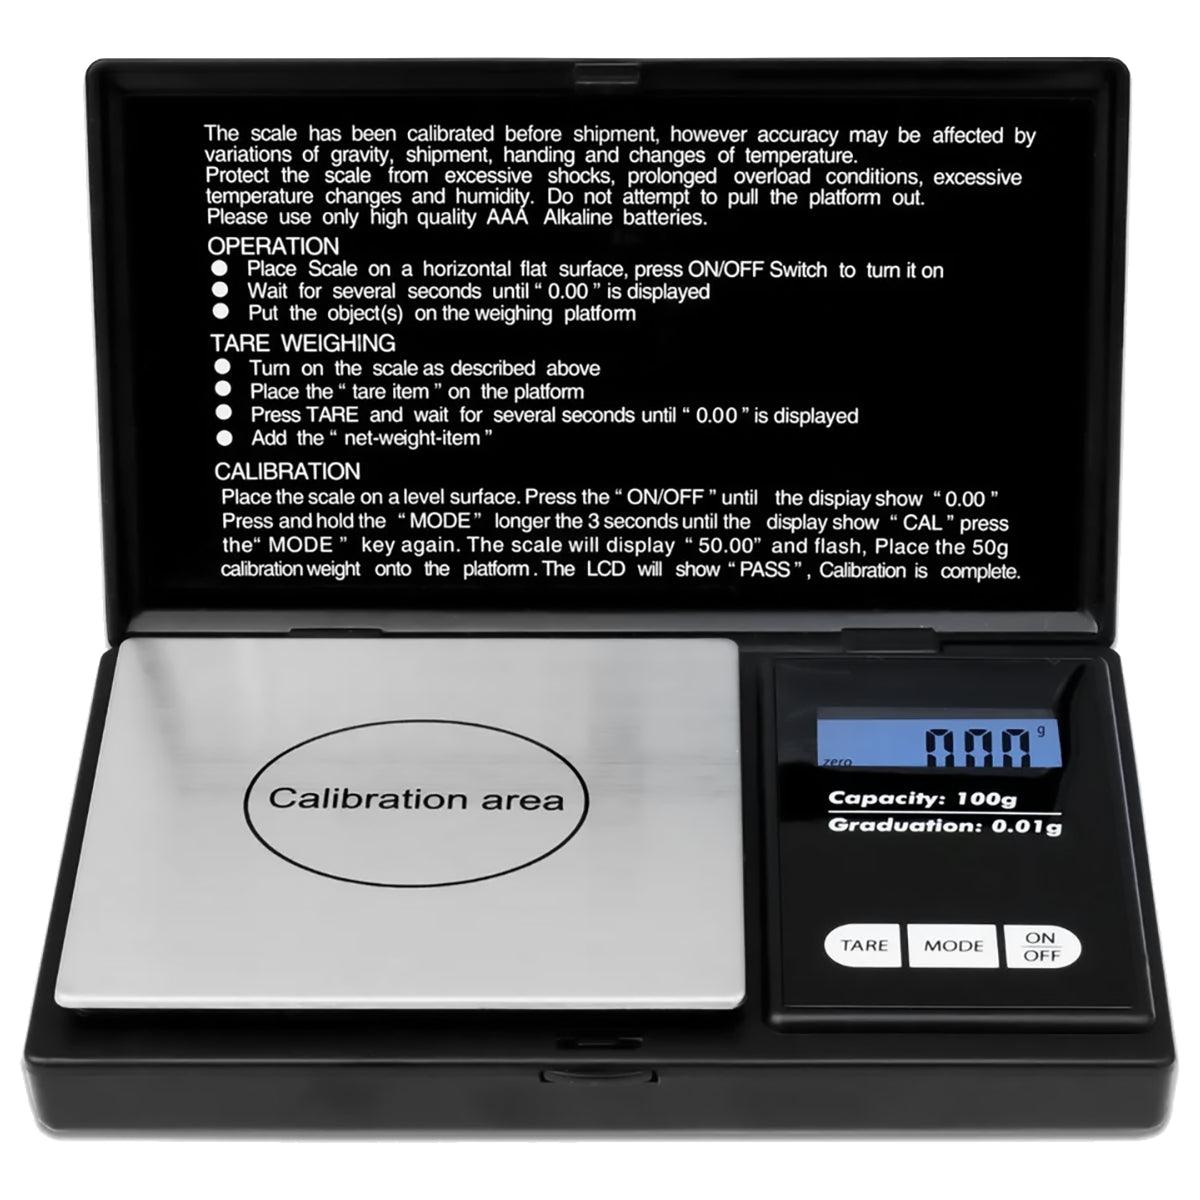 Weighmax Classic 3805 Series Digital Pocket Scale - 100g by 0.01g